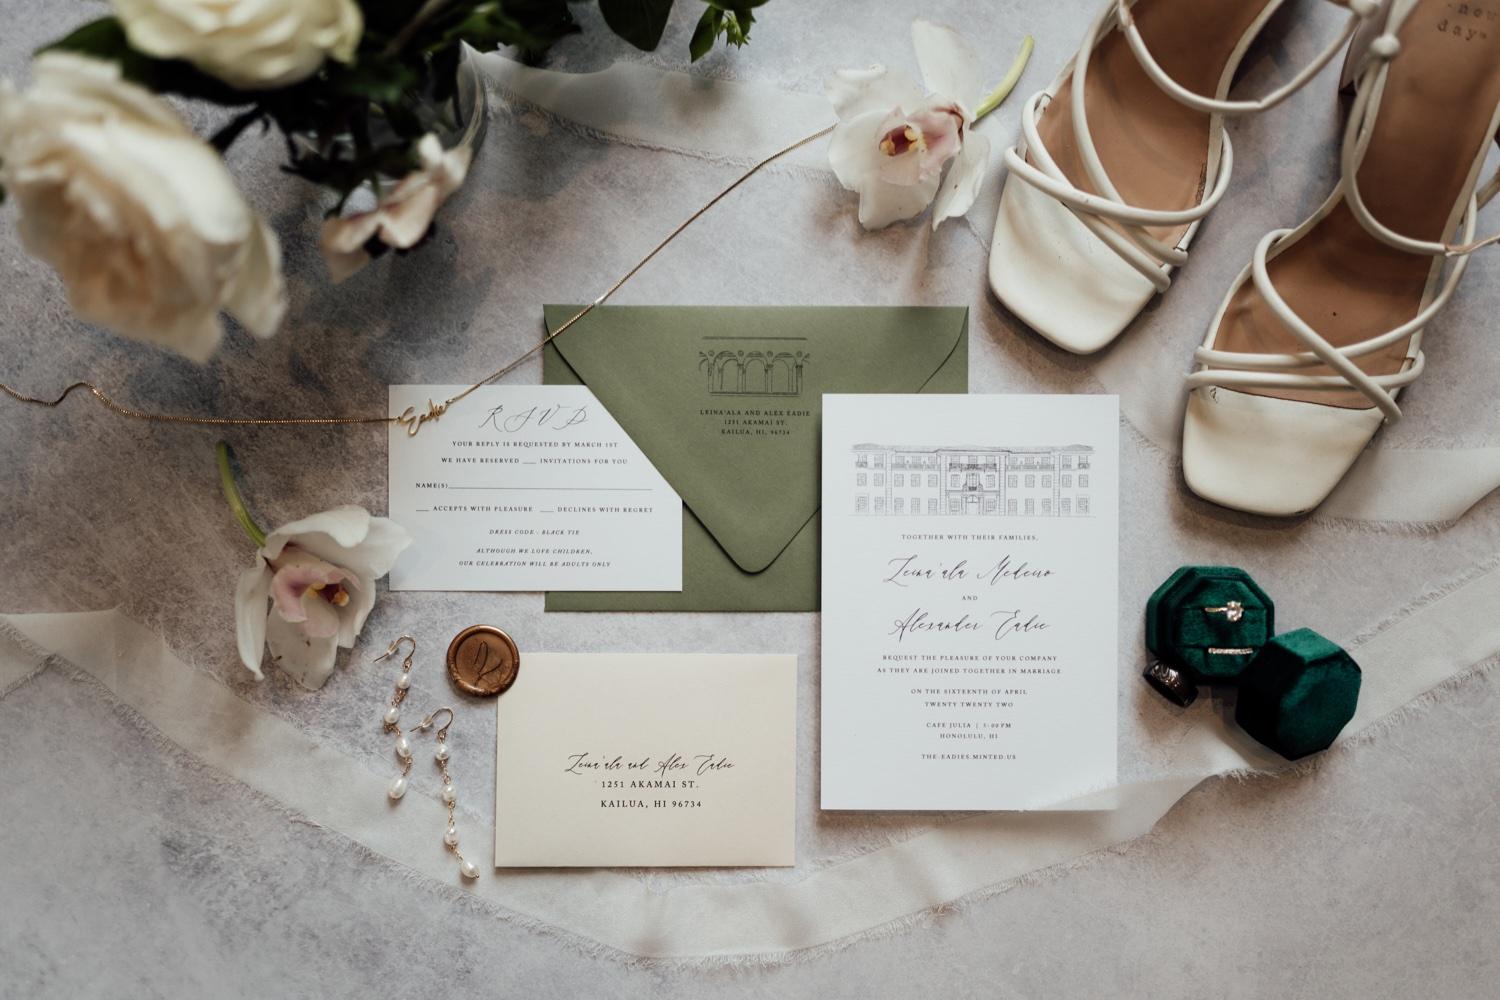 Layflat of wedding invitations and accessories